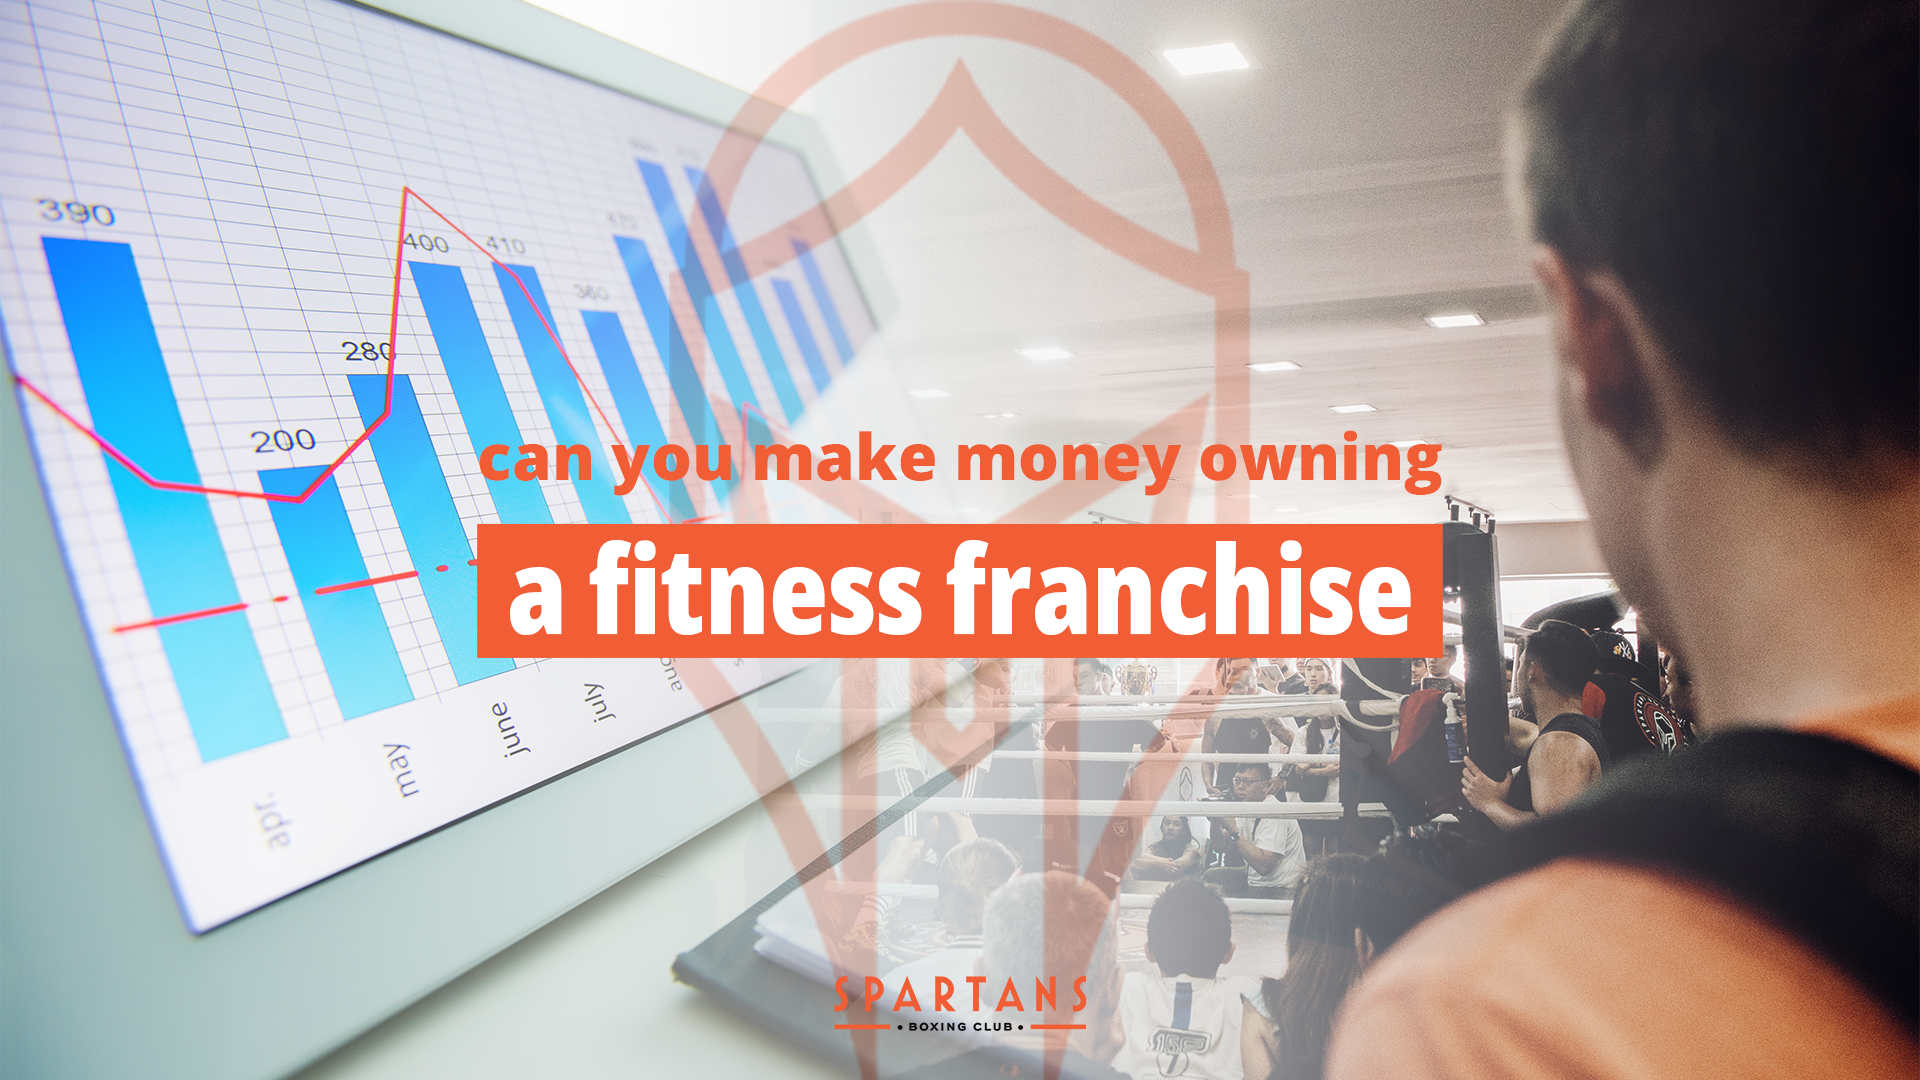 Can You Make Money Owning a Fitness Franchise?